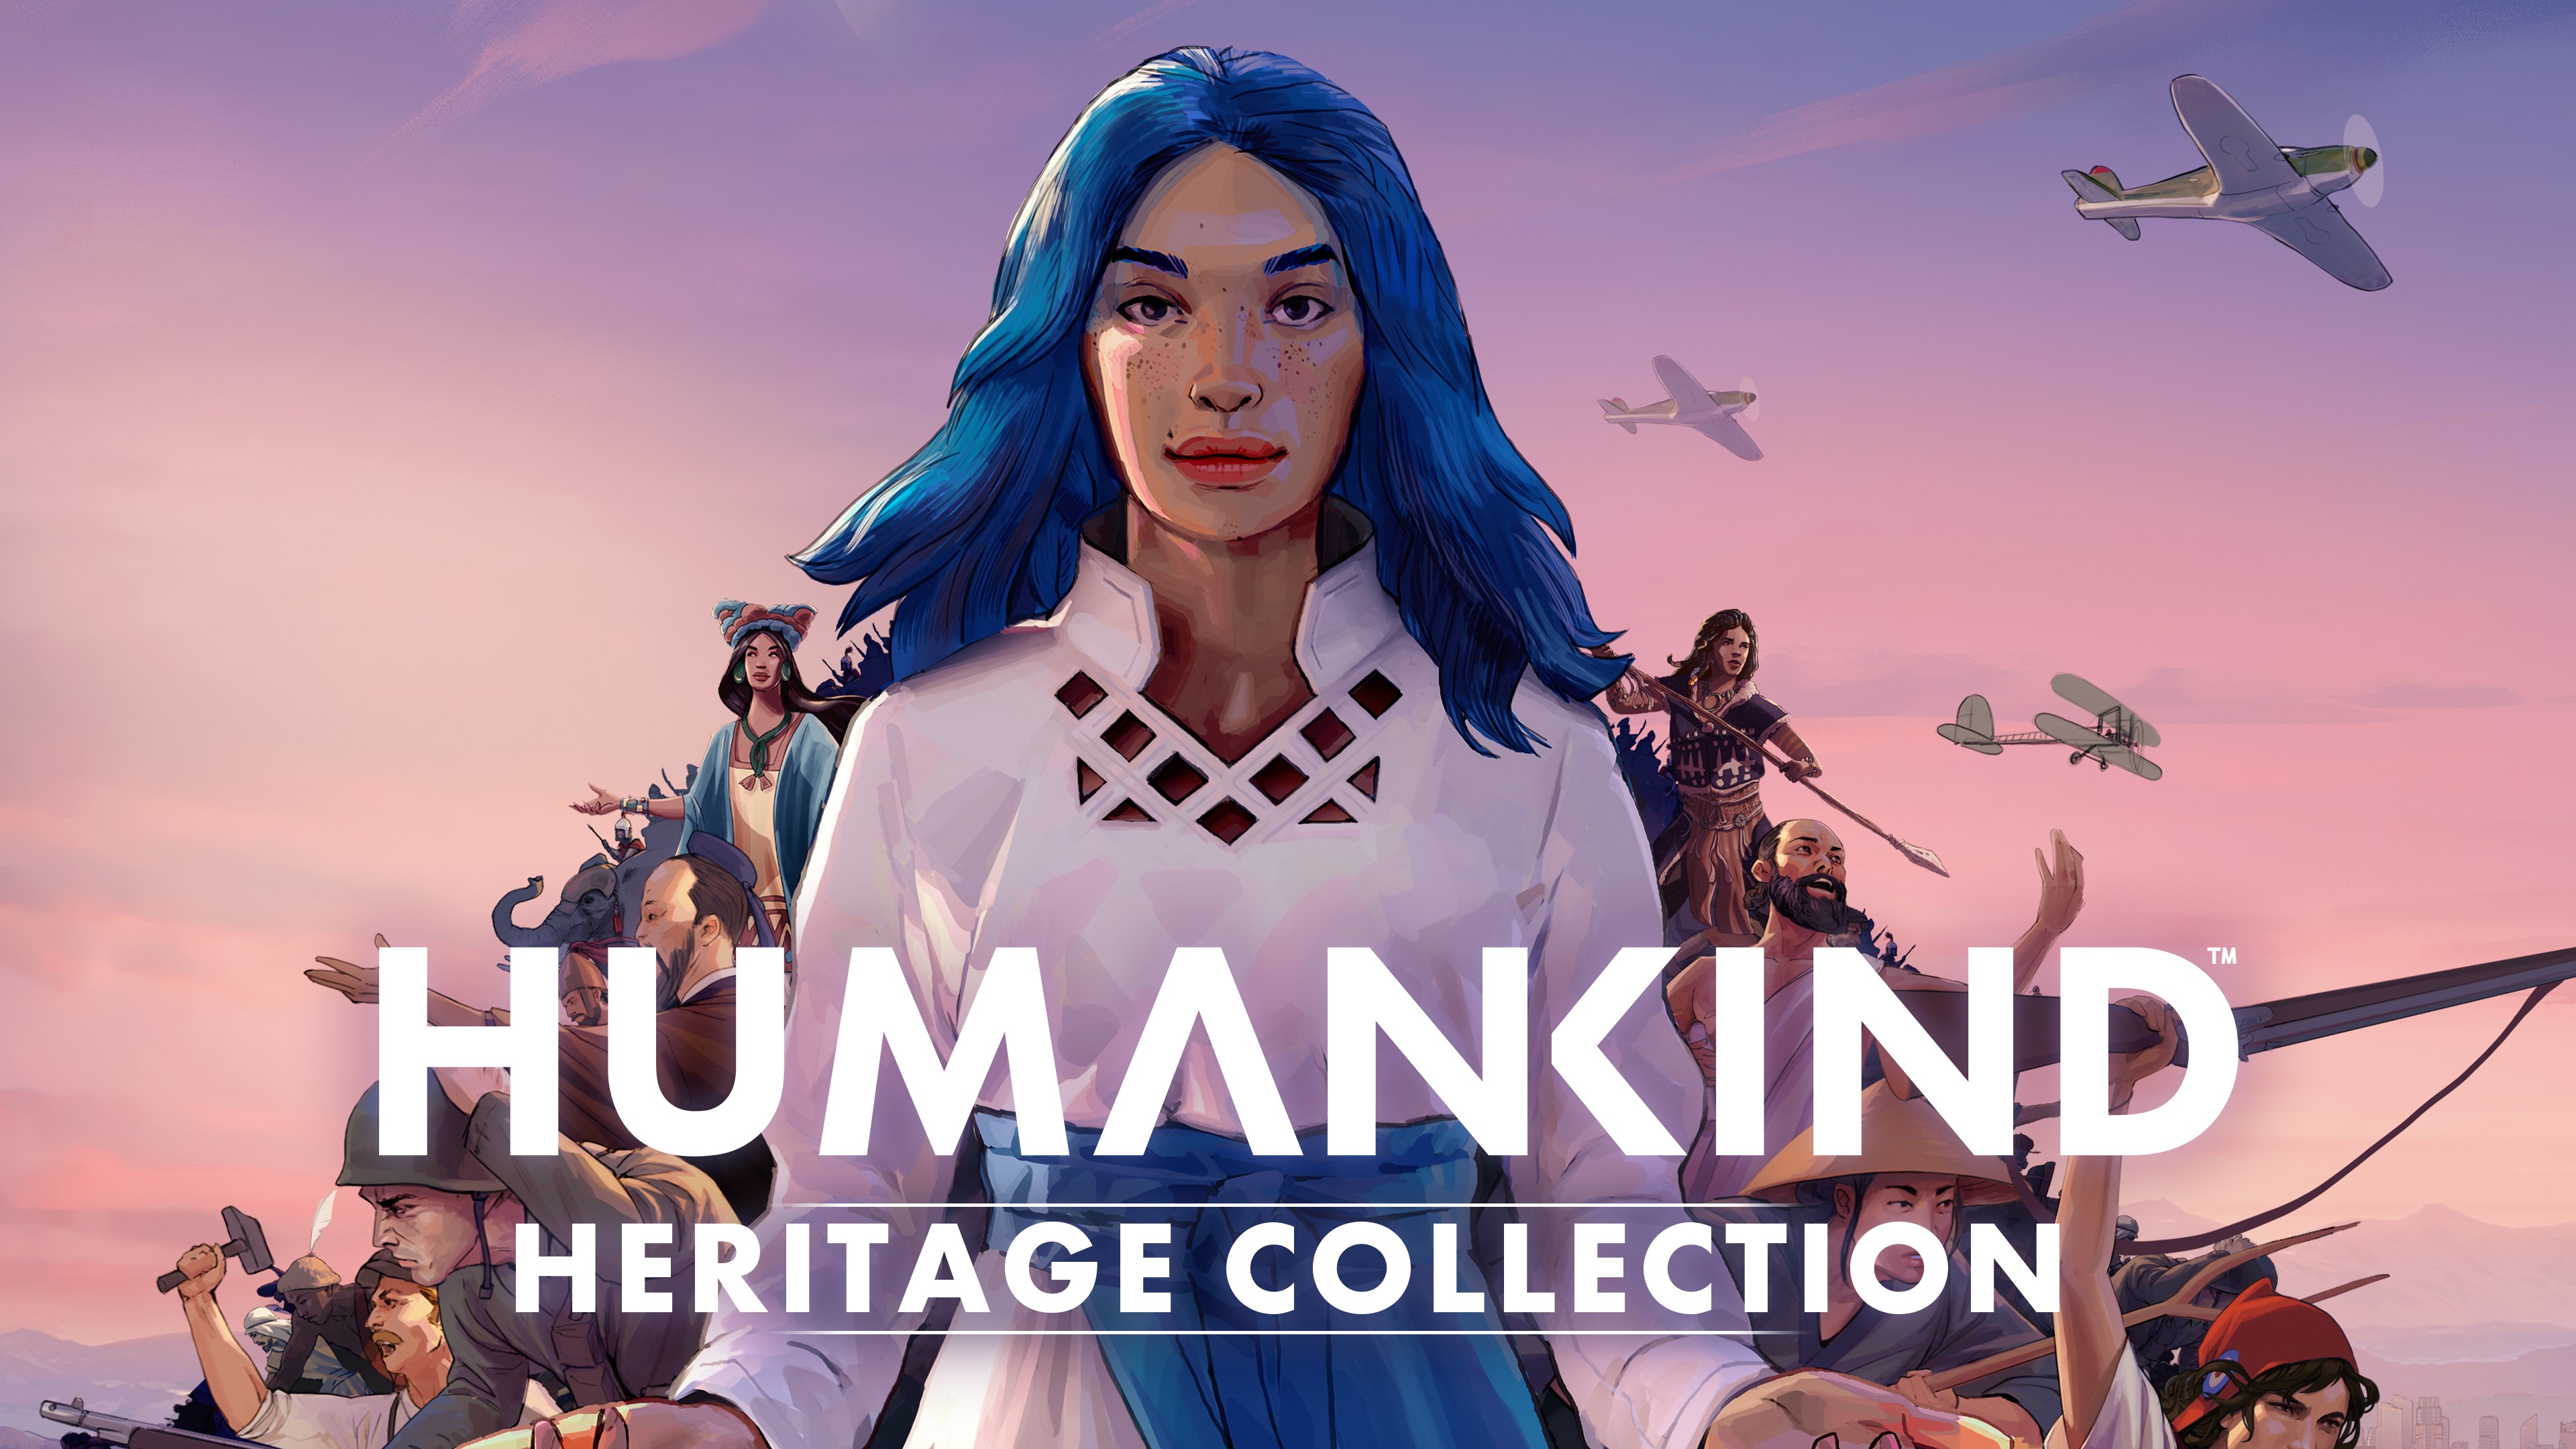 Find the best computers for HUMANKIND Heritage Collection